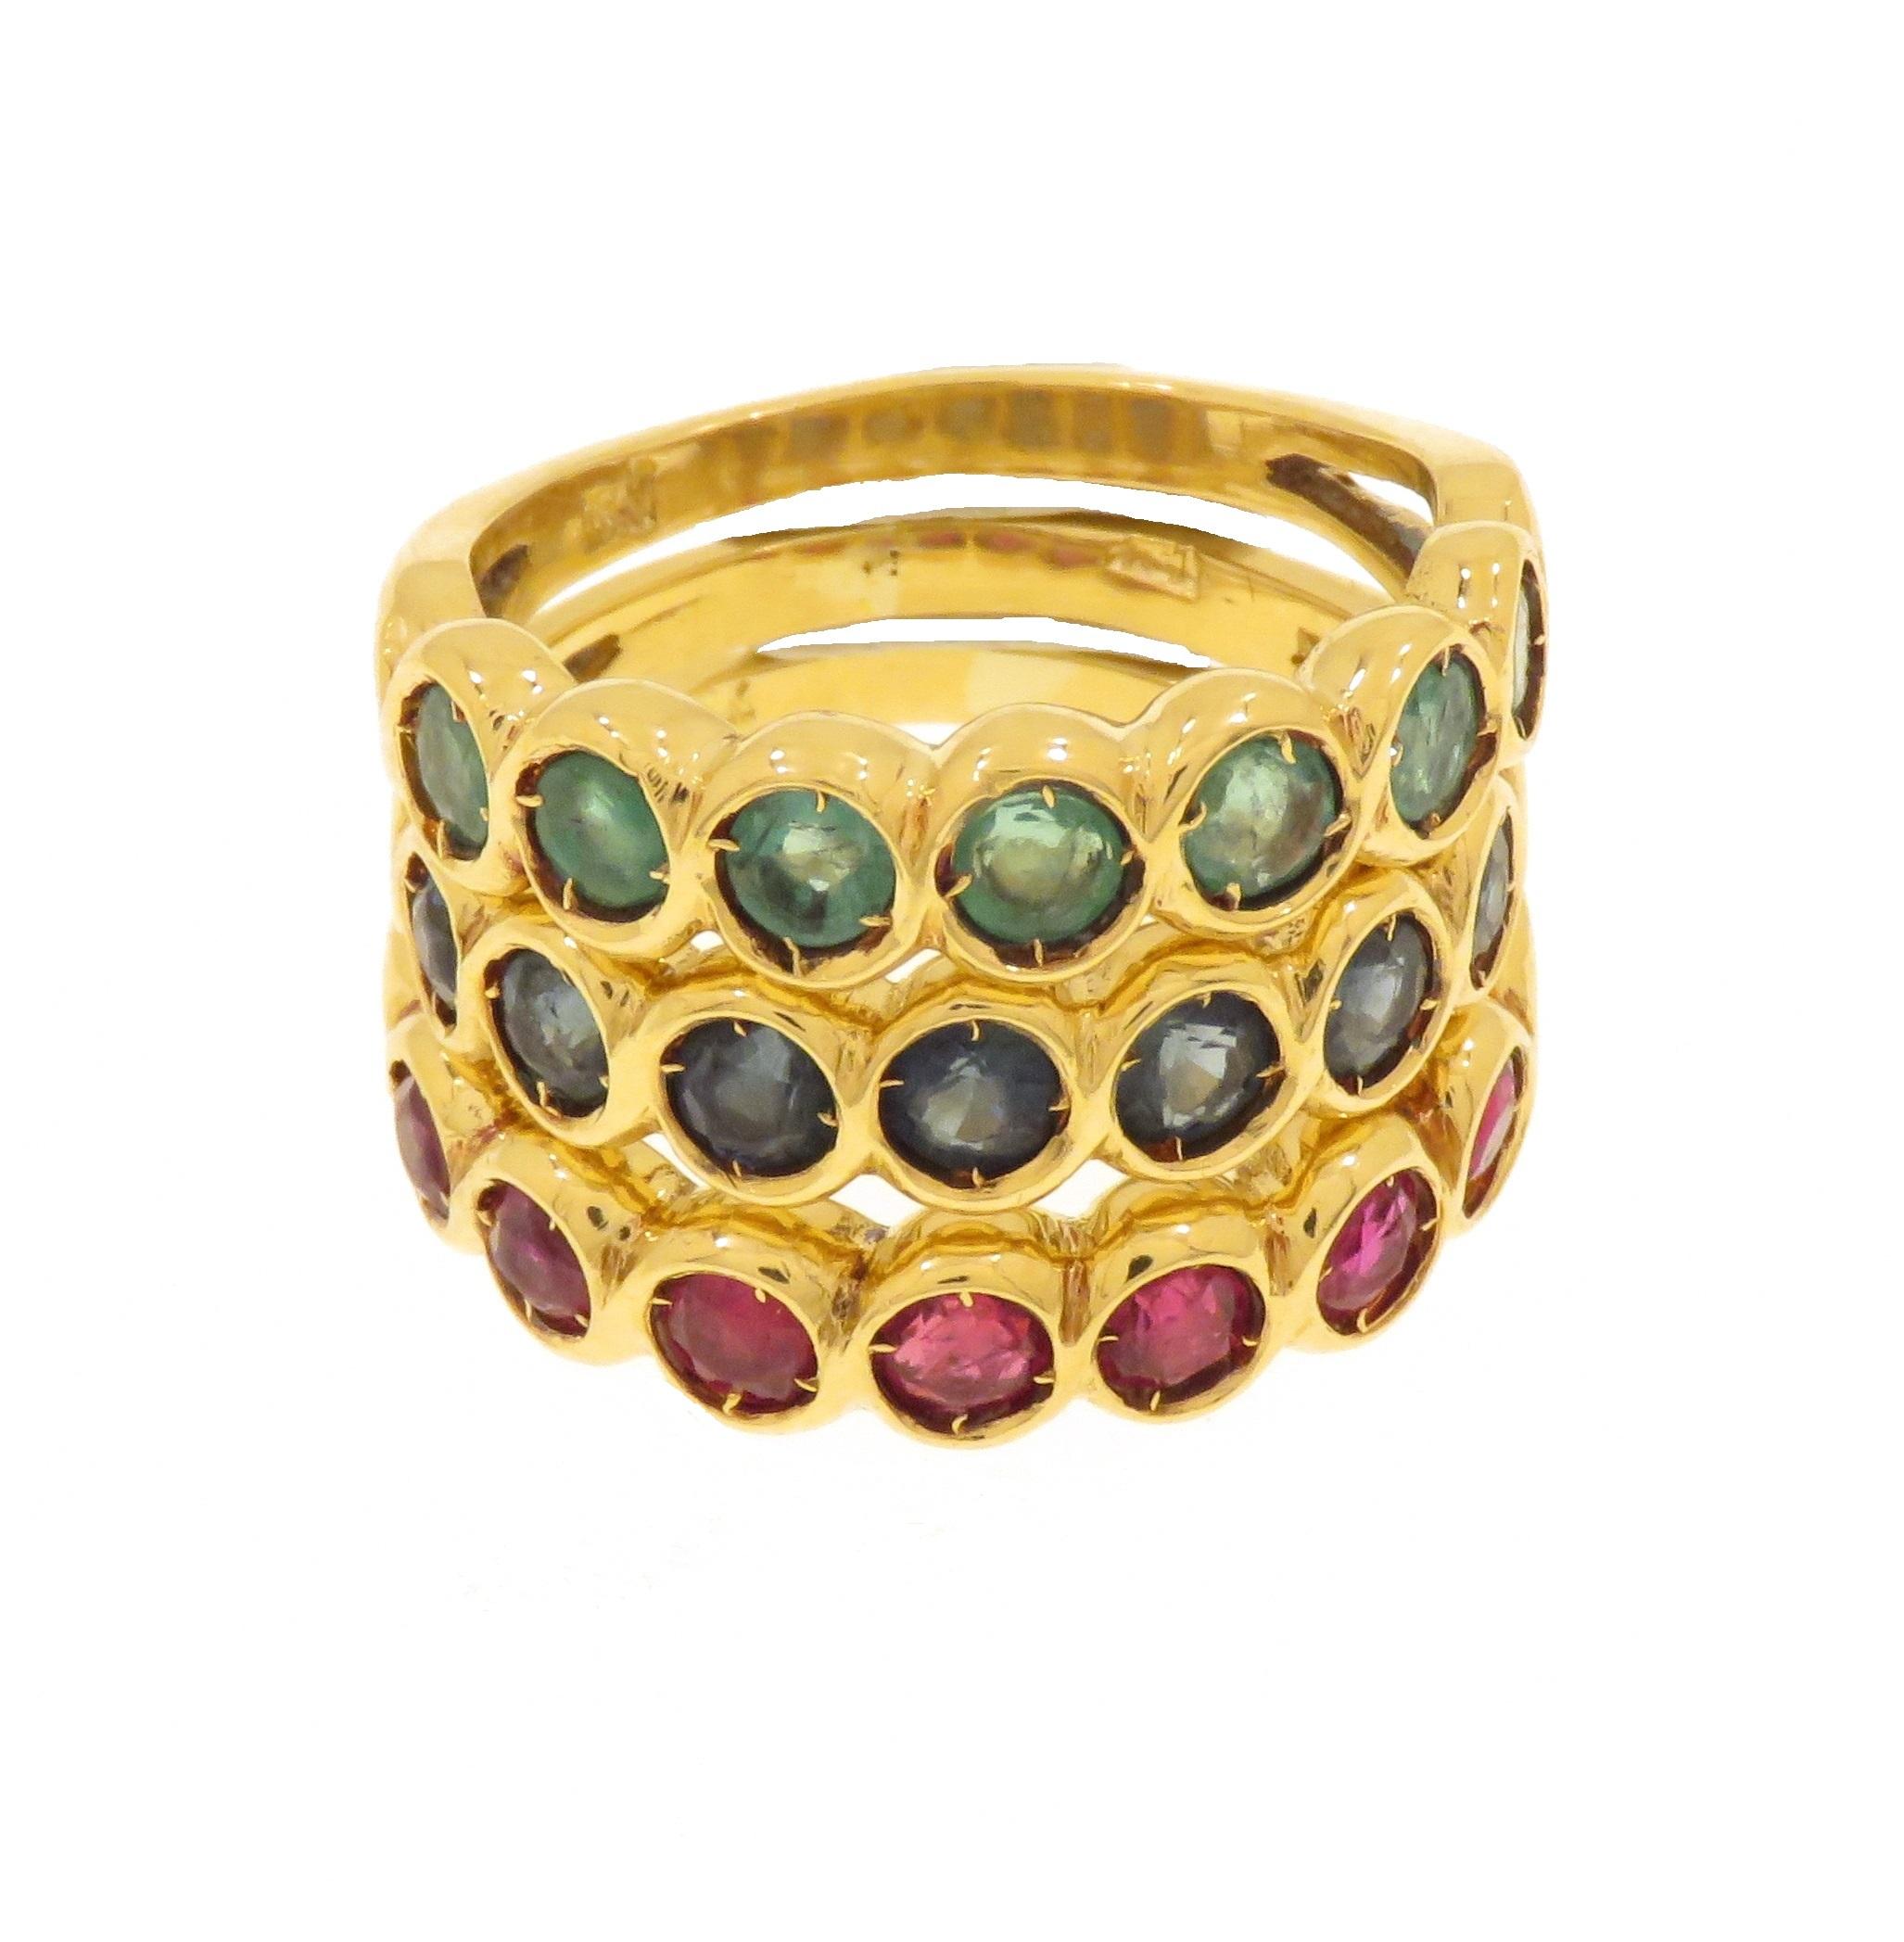 Three vintage eternity half rings in 18k yellow gold made te hand.
One with 7 emeralds of about 1 ct.
One with 7 rubies of about 1 ct.
One with 7 sapphires of about 1 ct.
Each stone measures 3 mm in diameter.
Finger size: US 5.5, Italy 11, France